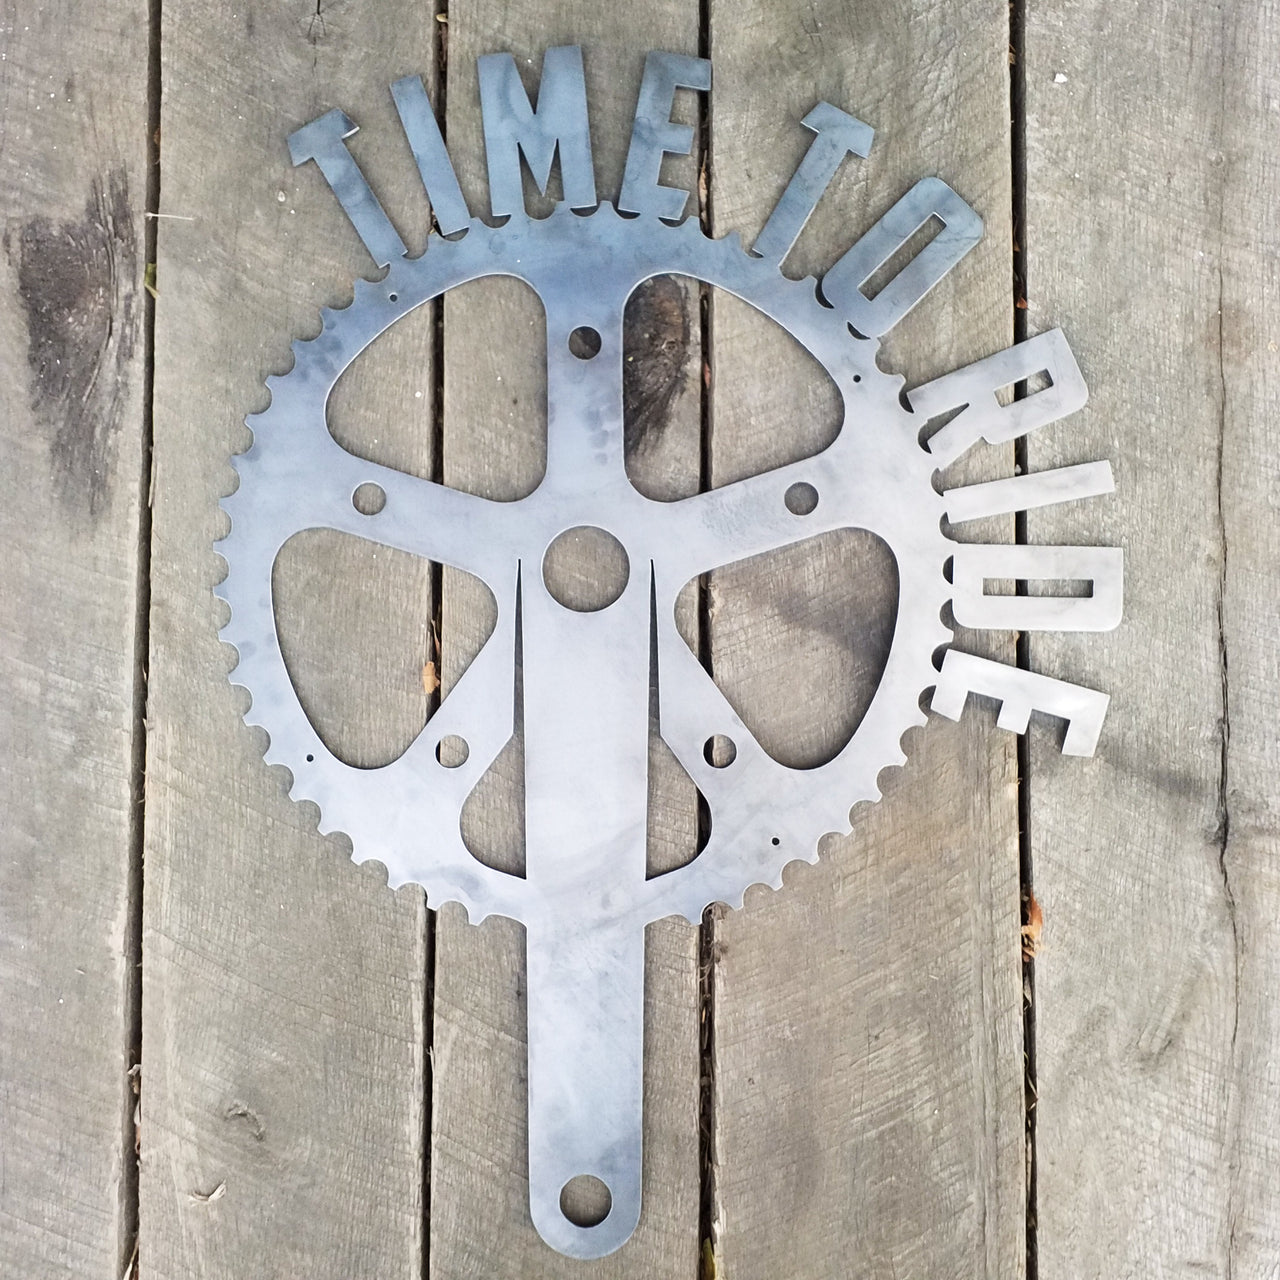 Time to Ride! Bike Gear - Fitness Home Gym Sign - Work Out, Exercise, Biking Wall Art